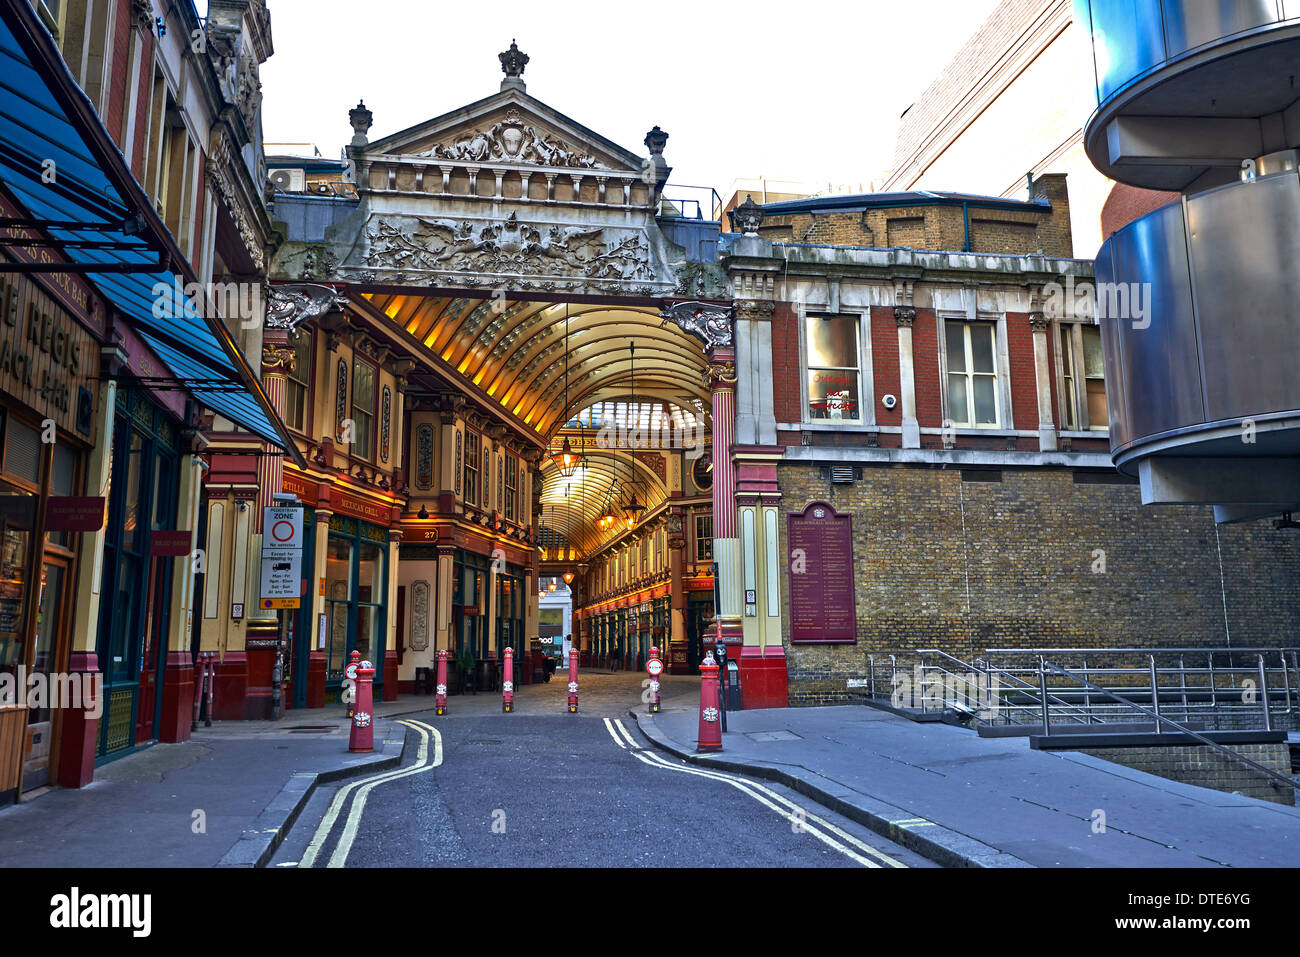 Leadenhall Market is a covered market in London, located on Gracechurch ...